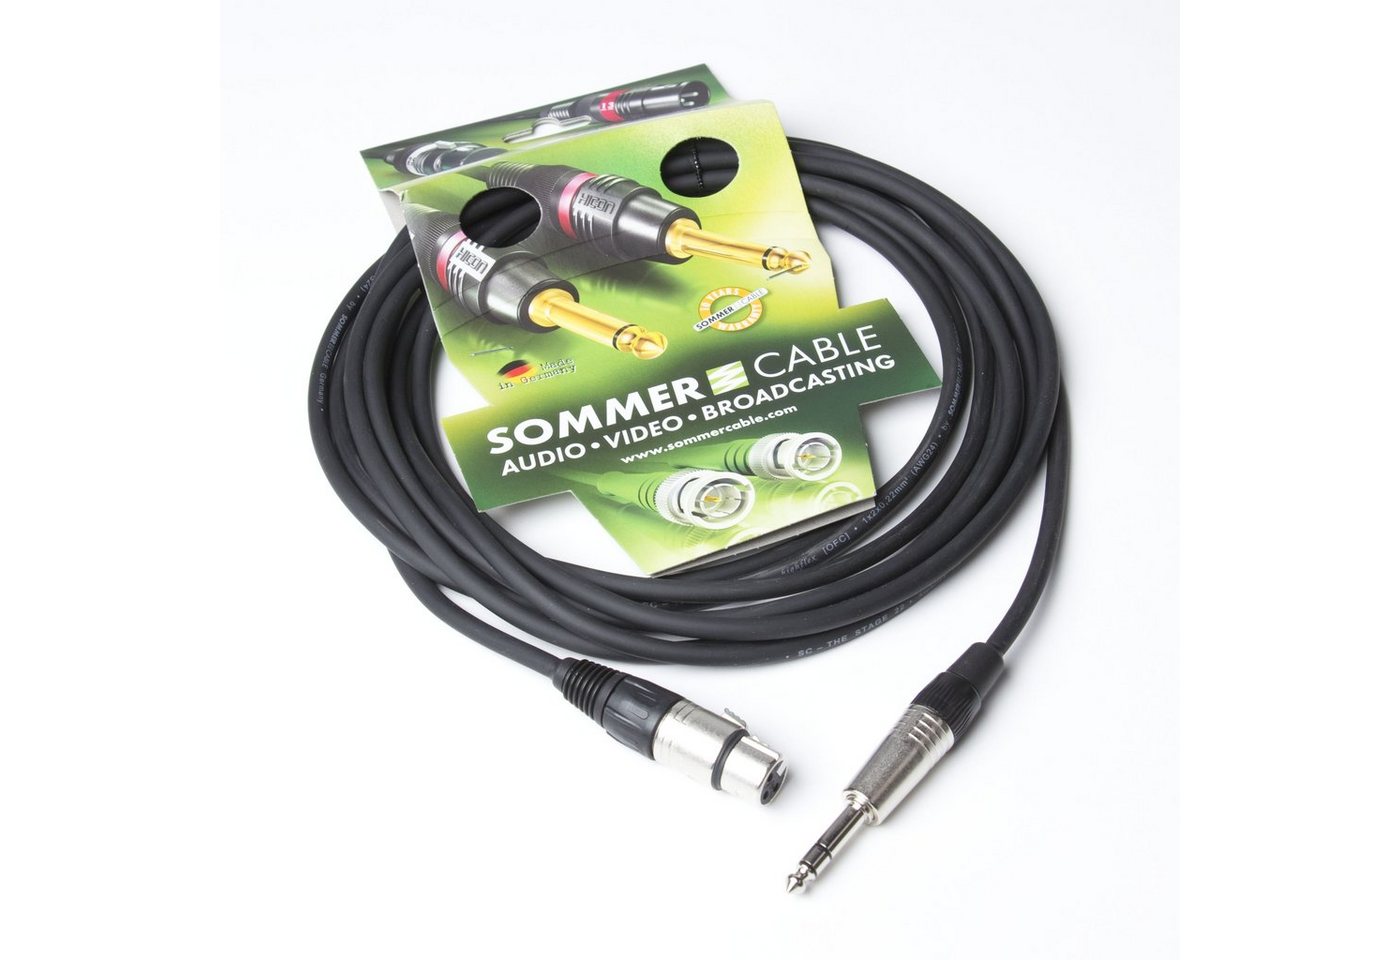 Sommer Cable Audio-Kabel, SG05-0050-SW Stage 22 Mikrofonkabel 0,5m - Mikrofonkabel von Sommer Cable